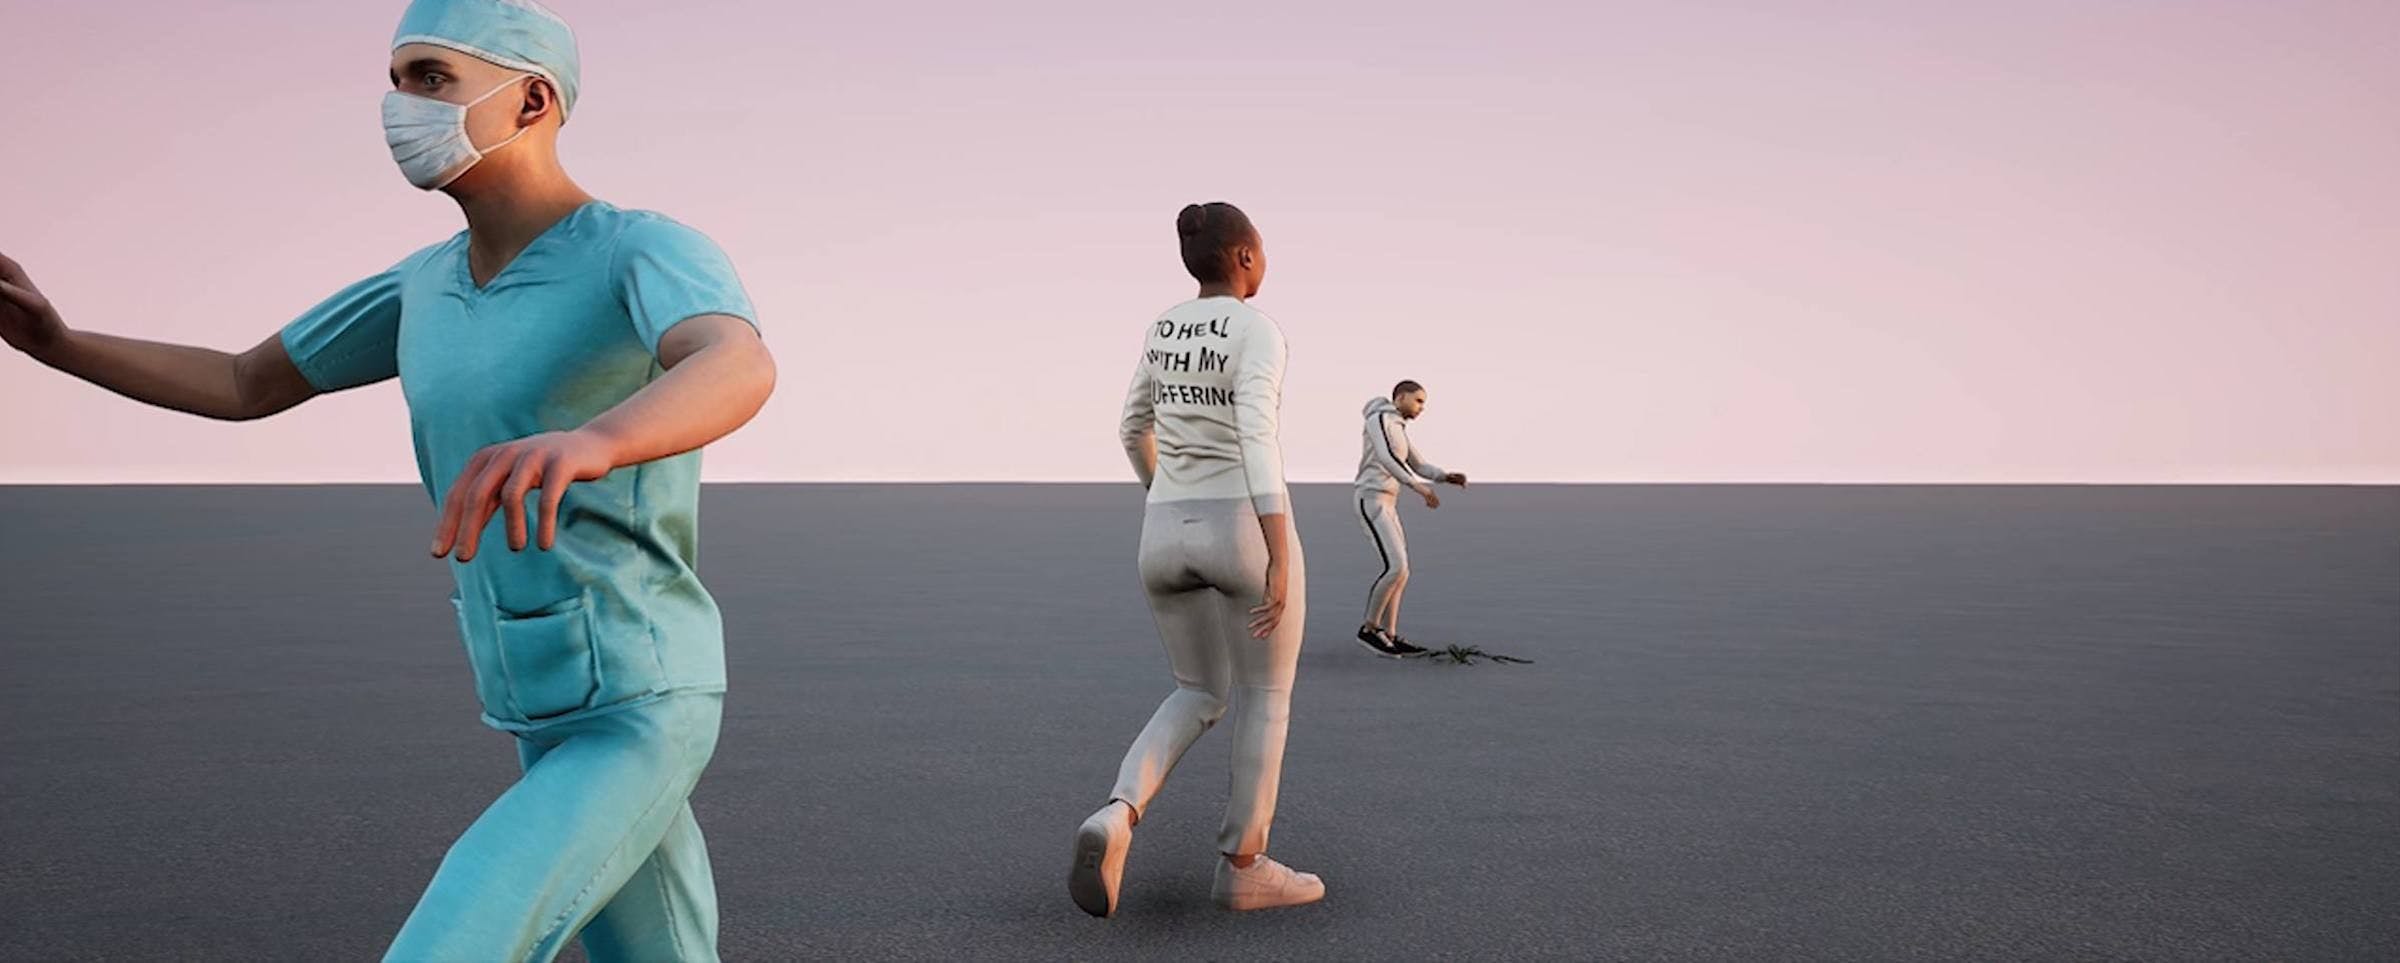 Computer-generated image of three figures walking through a blank space. One is dressed as a surgeon and the other two are dressed wearing casual clothes.